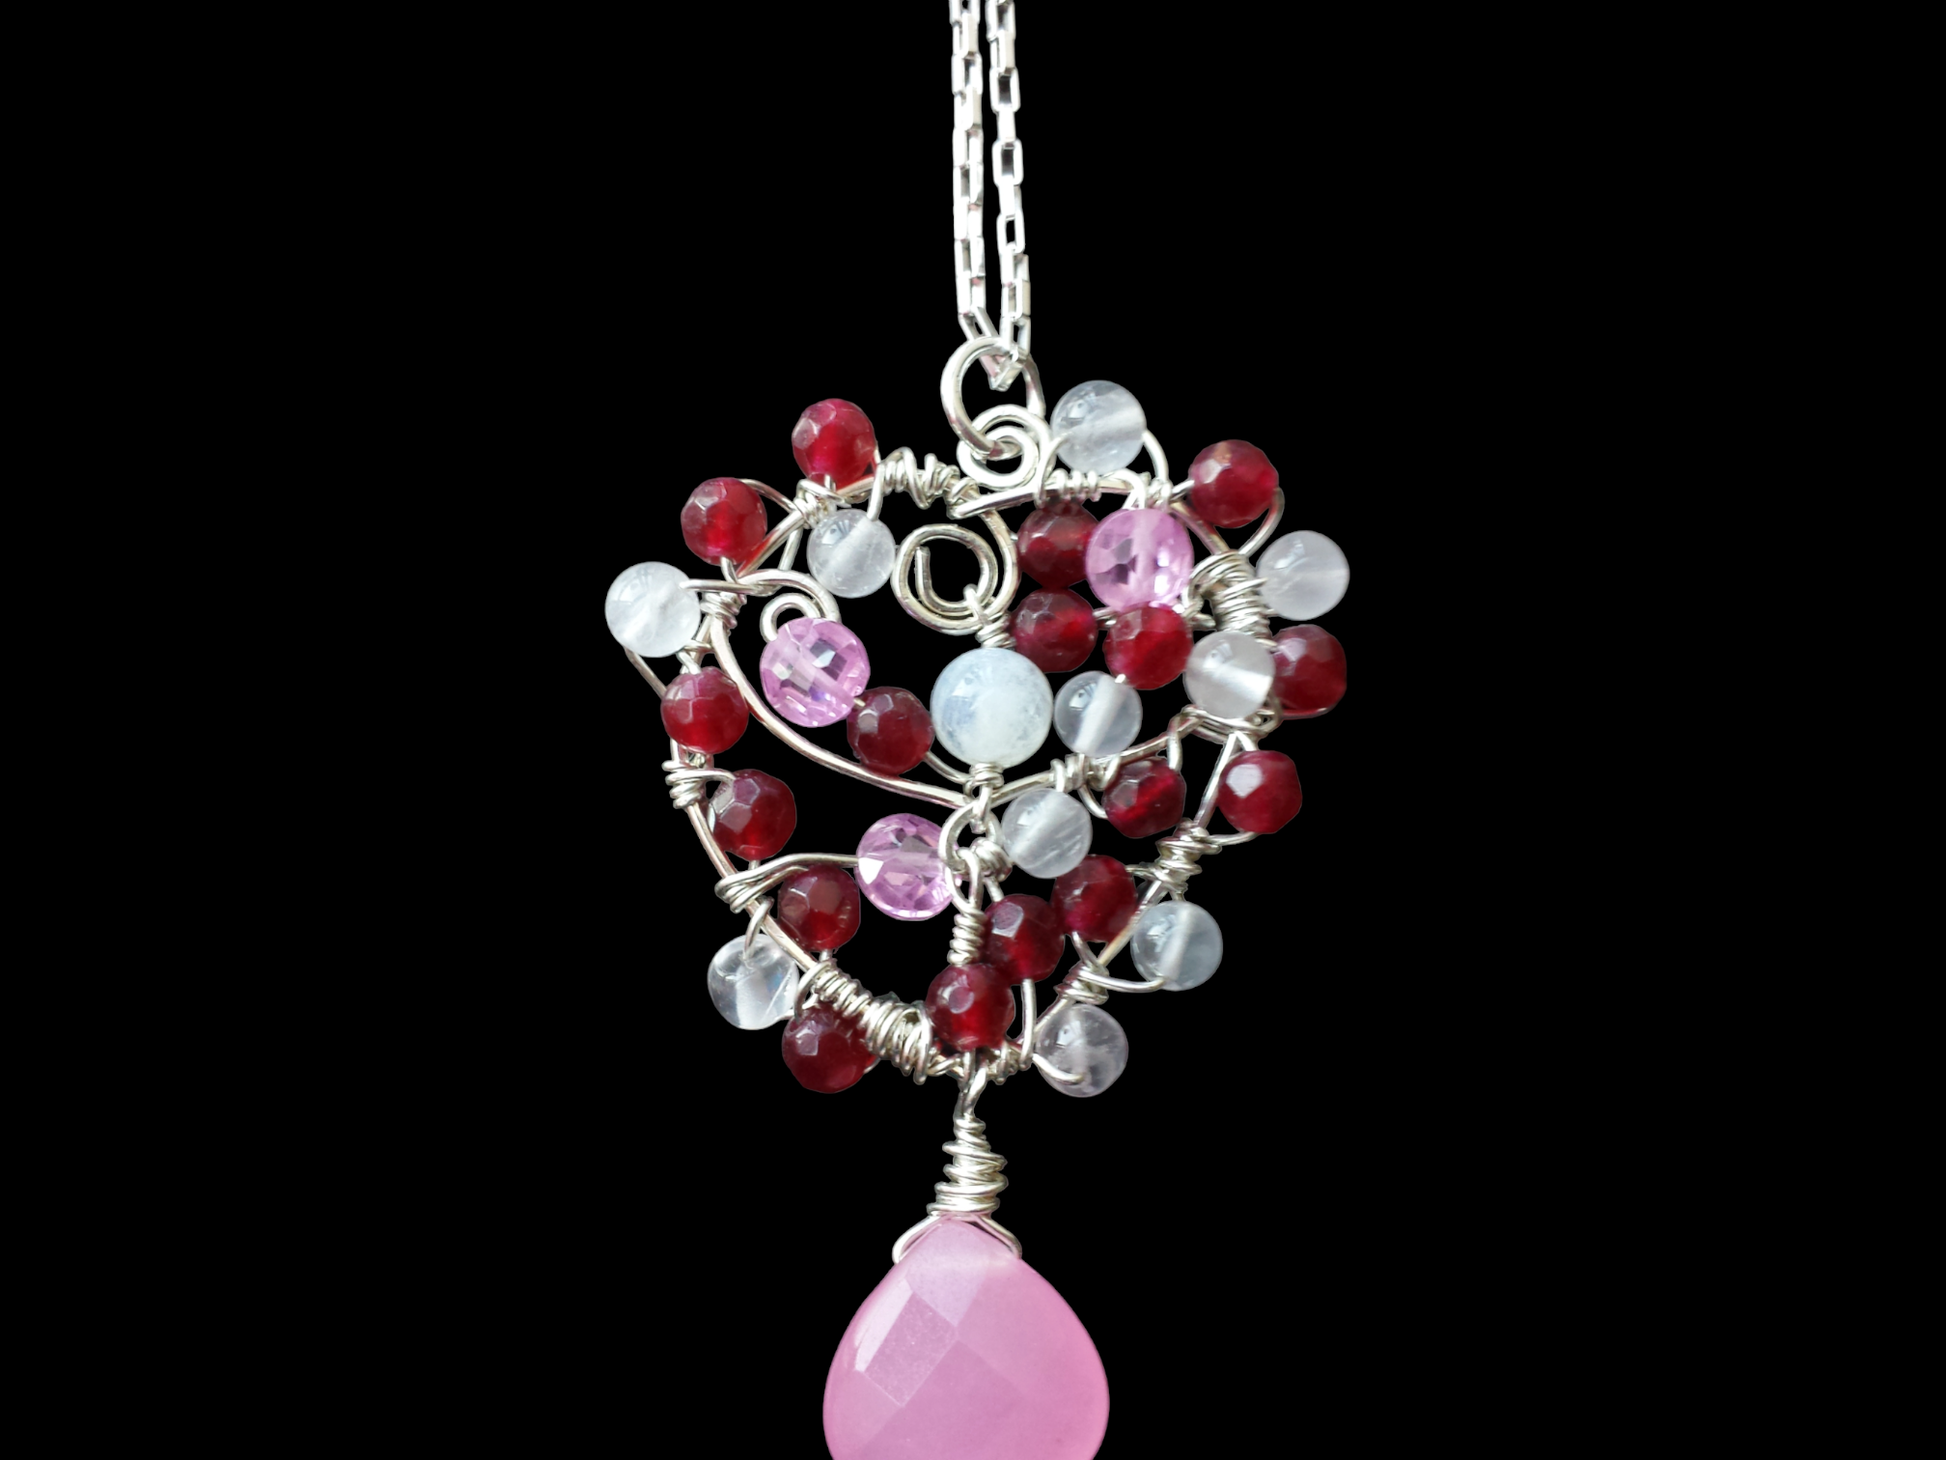 Heart of Gems Pendant Necklace, One of a Kind, Sterling Silver Multi Gemstone Wire Work Pendant, Reds & Pinks, Moonstone, Jade